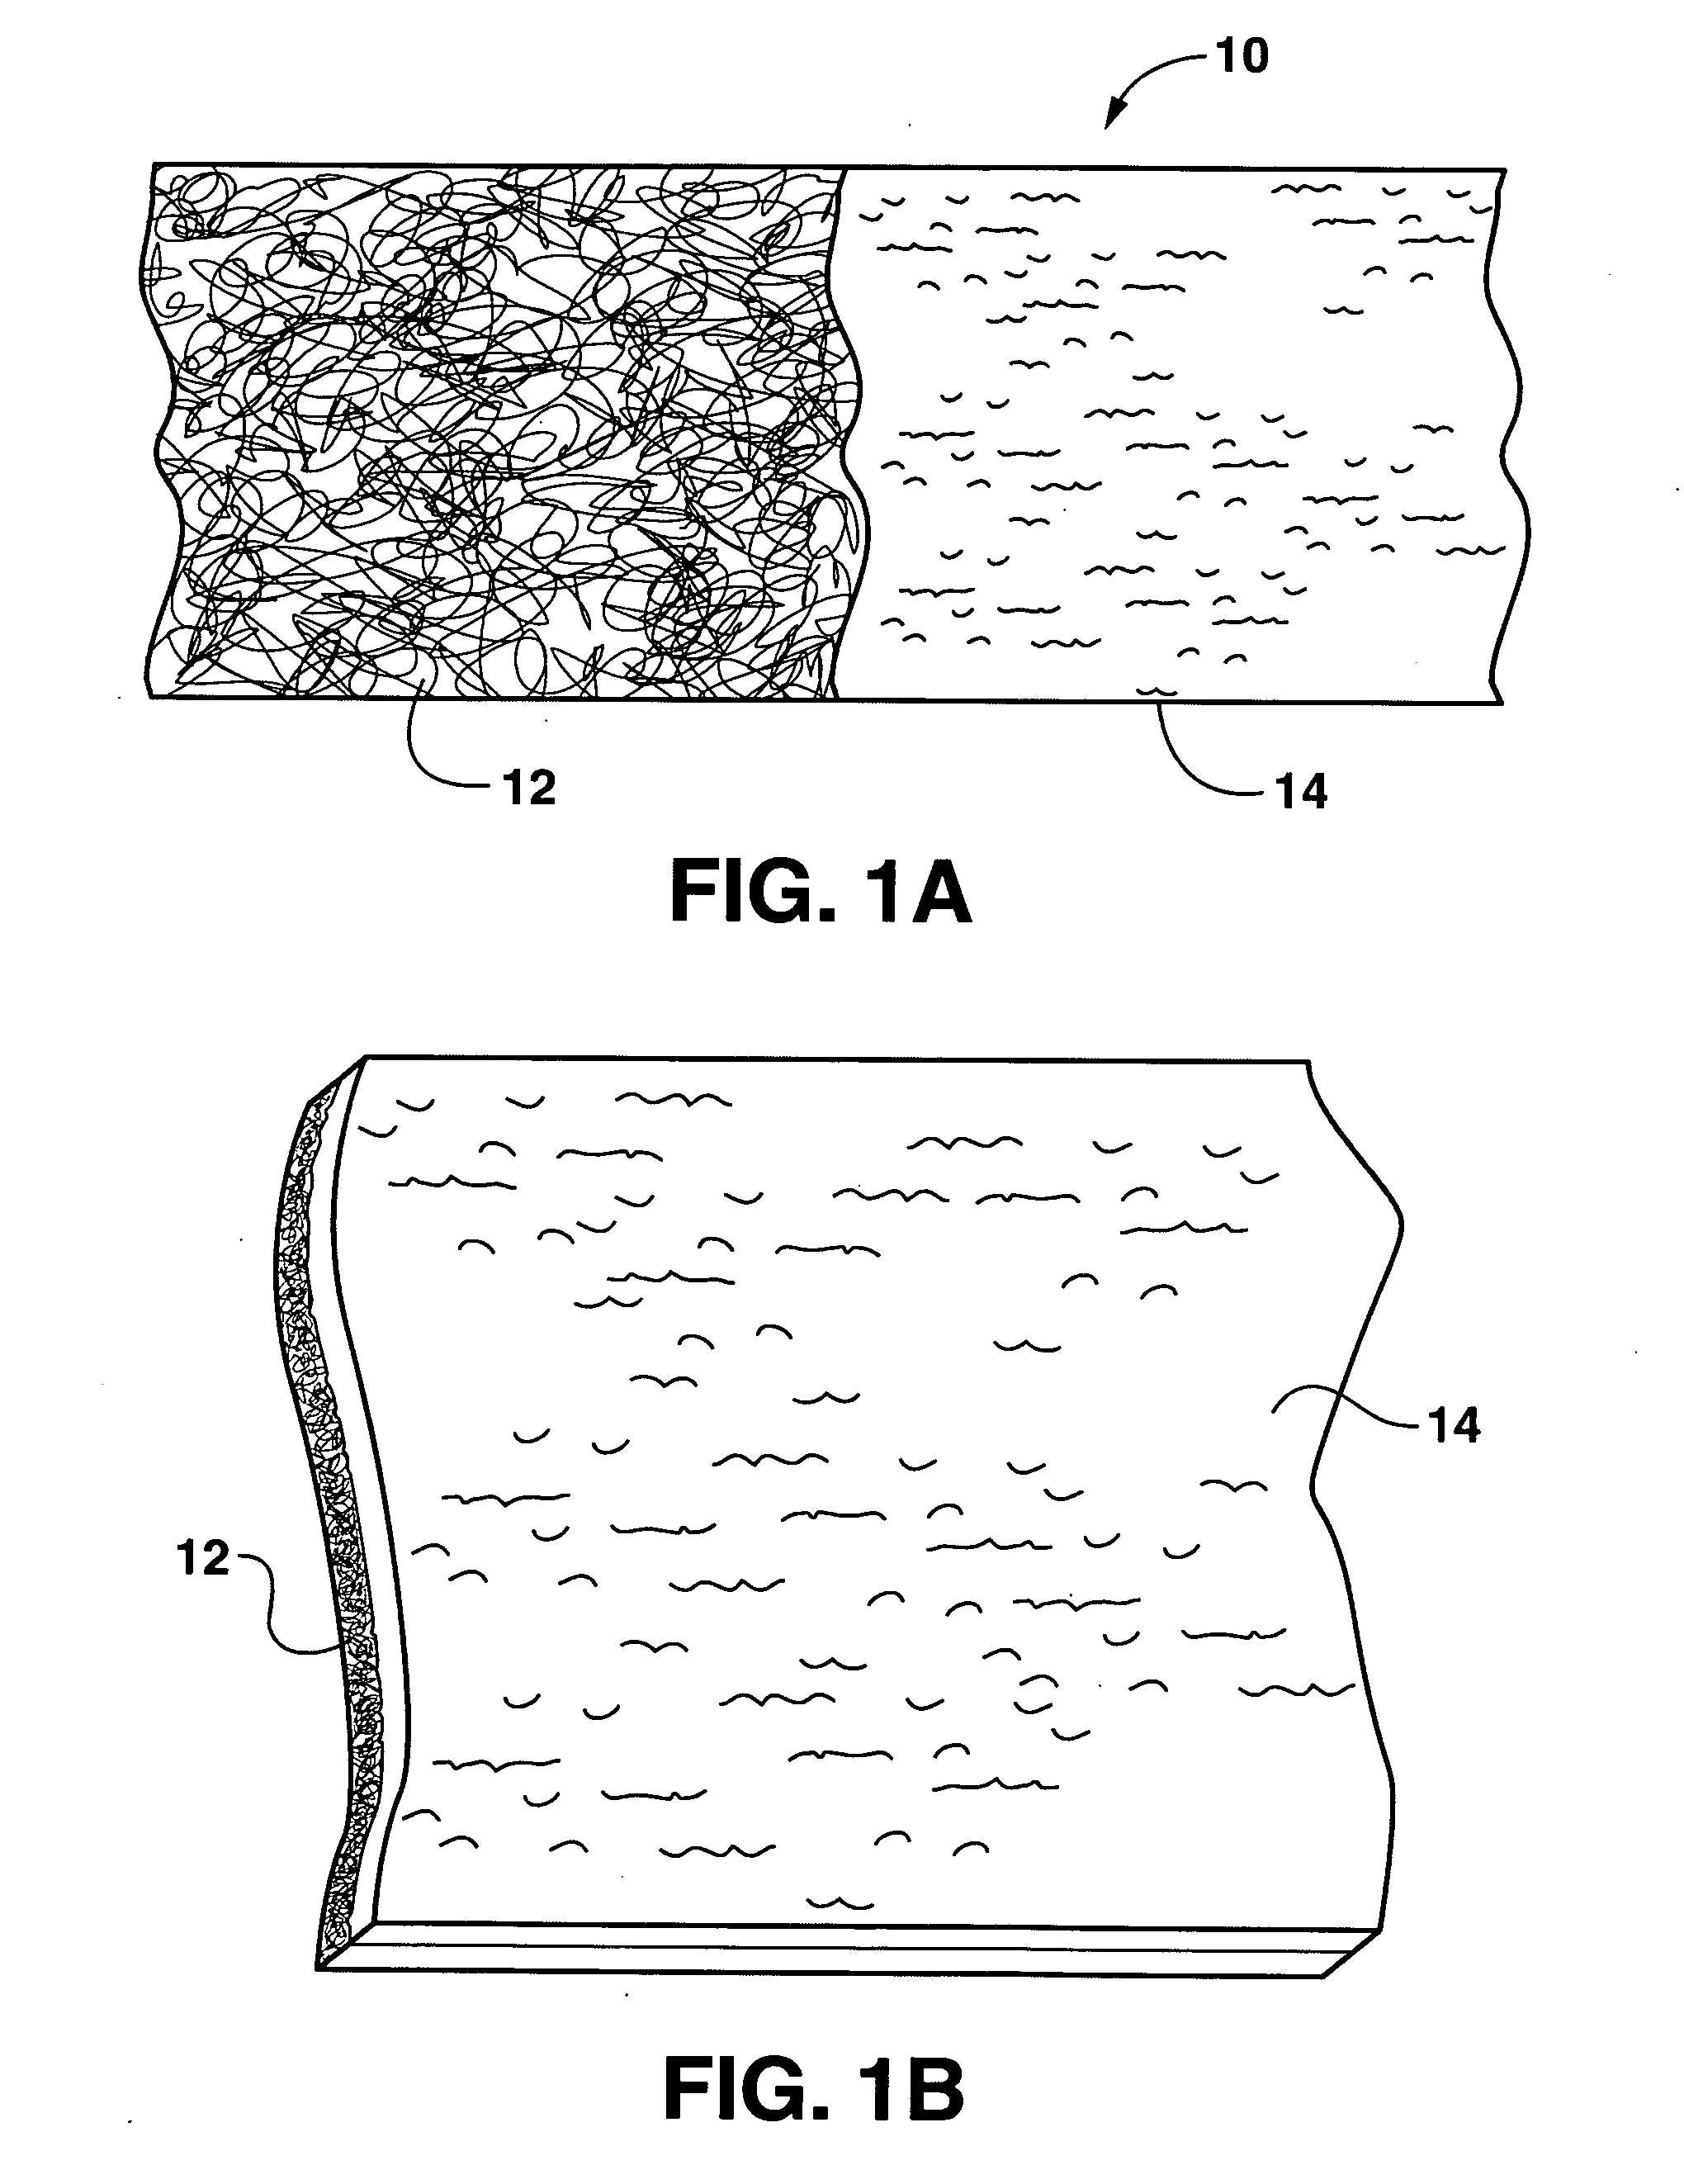 Self-activated cooling device